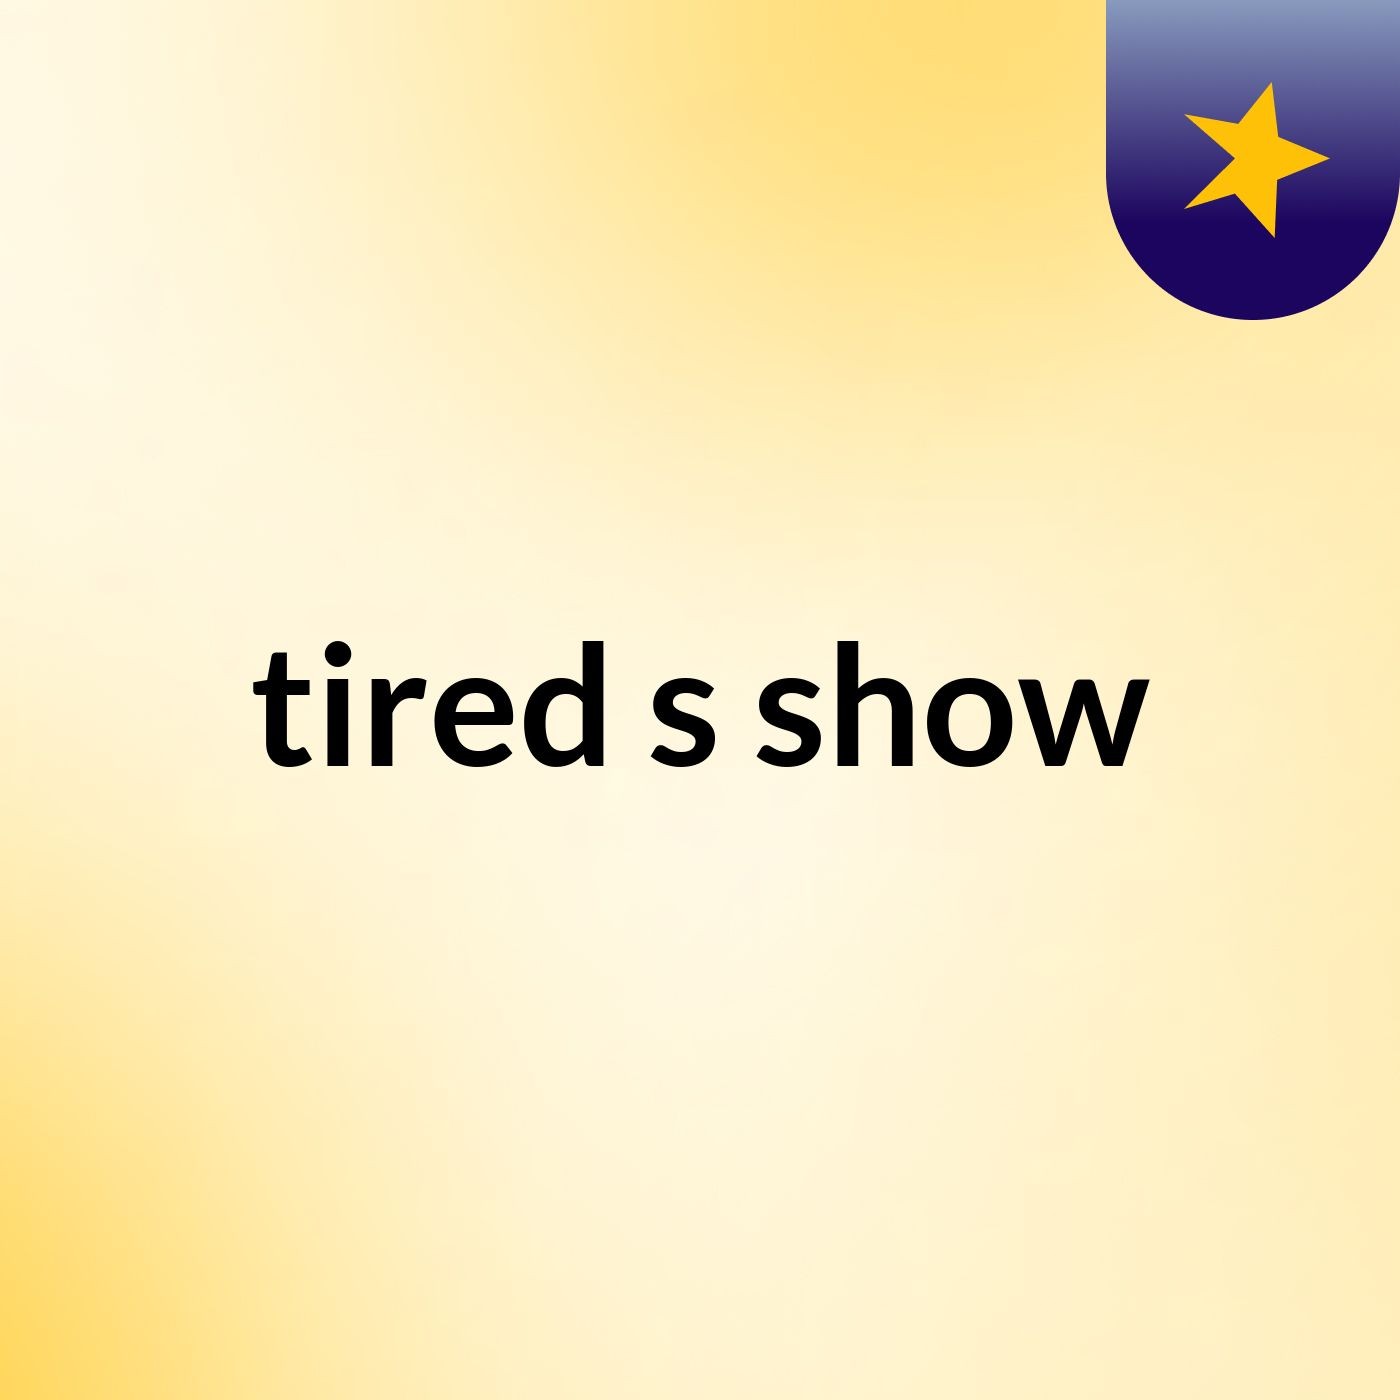 tired's show